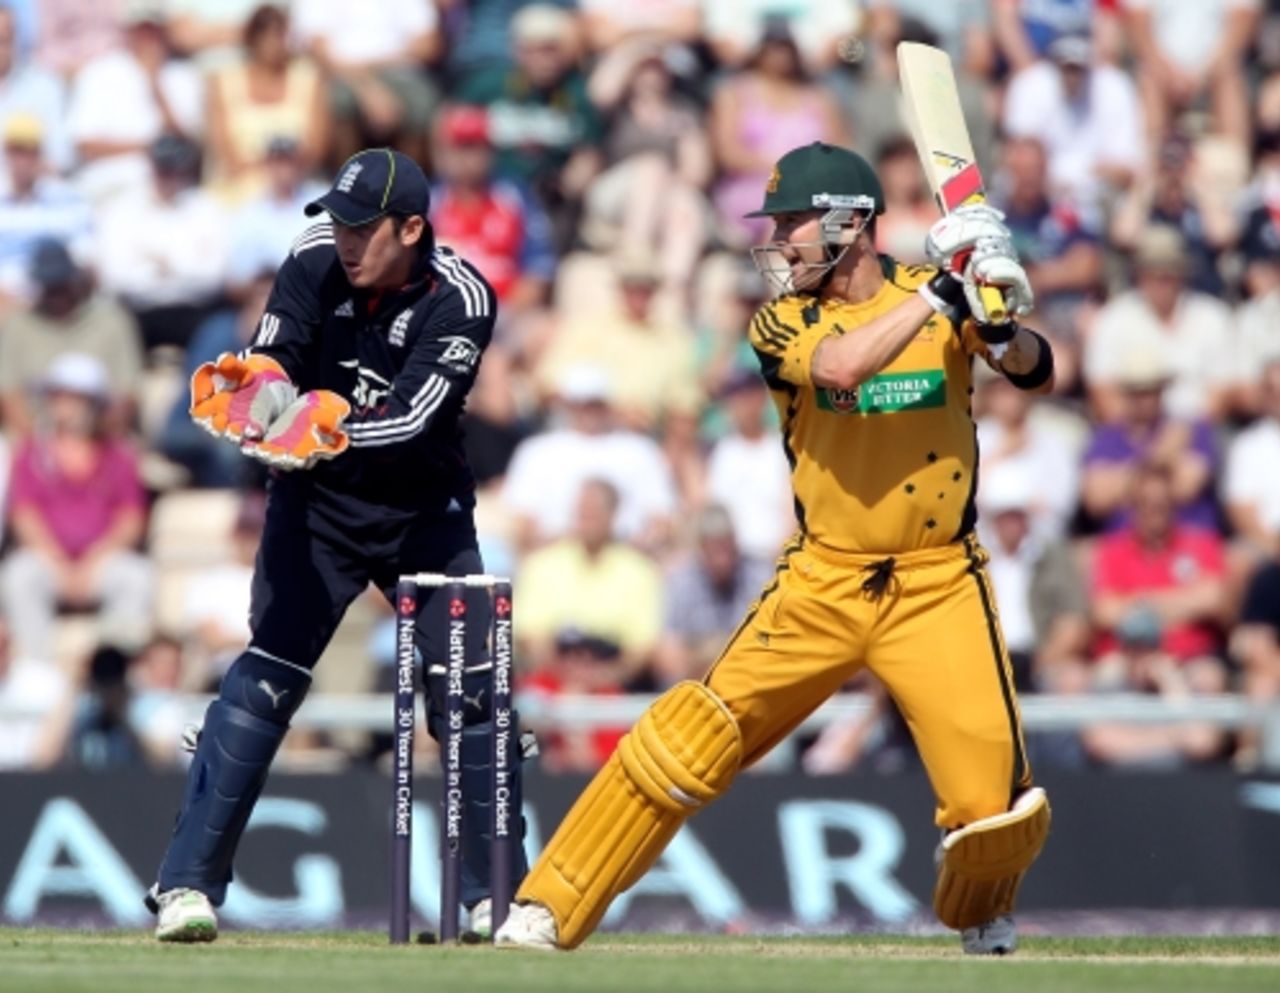 Michael Clarke cuts behind square on his way to a half-century, England v Australia, 1st ODI, Rose Bowl, June 22, 2010